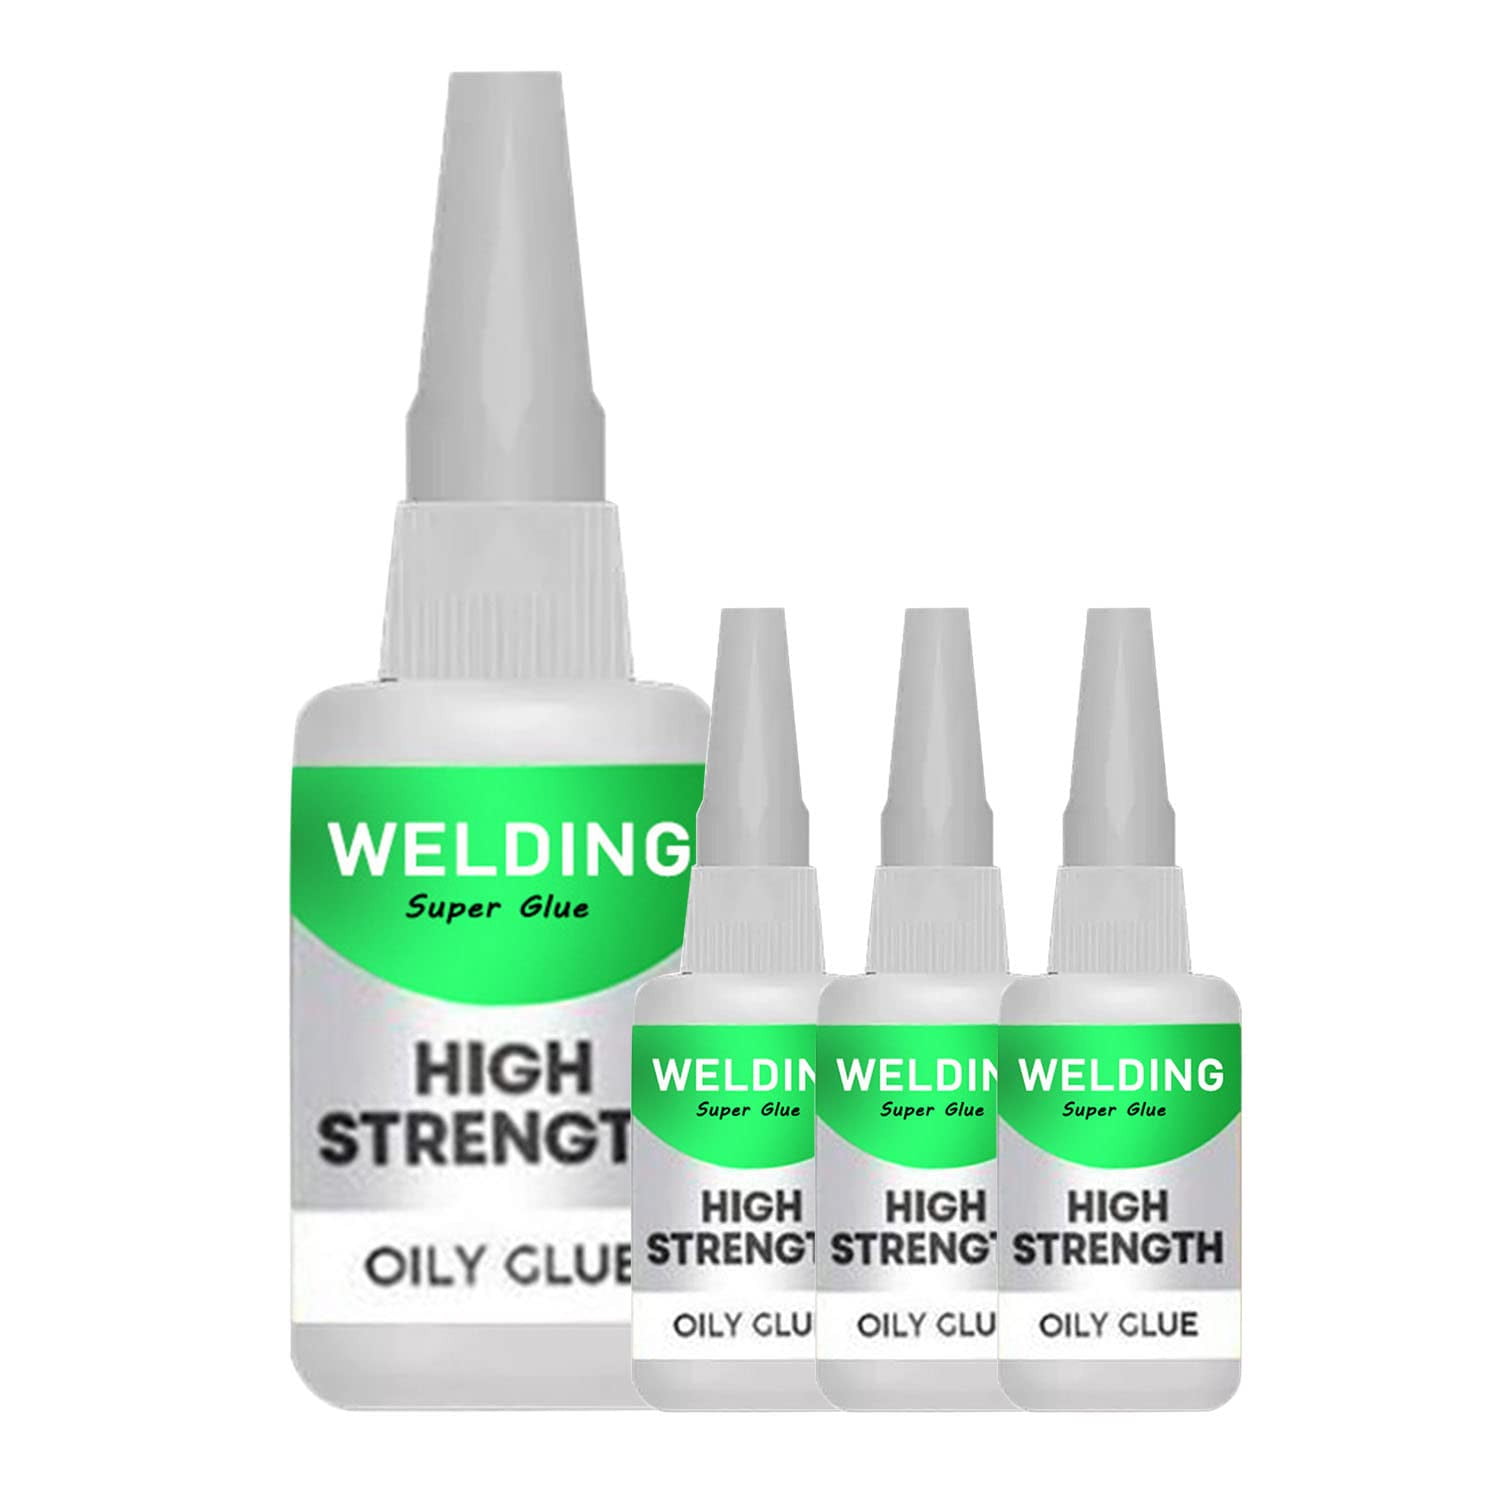 Teissuly Tree Frog Oily Glue,Welding High-Streth Oily Glue,Repair Glue for  Electrical,Electronic,Craft,Rock,Glass,Plastic,Toy 